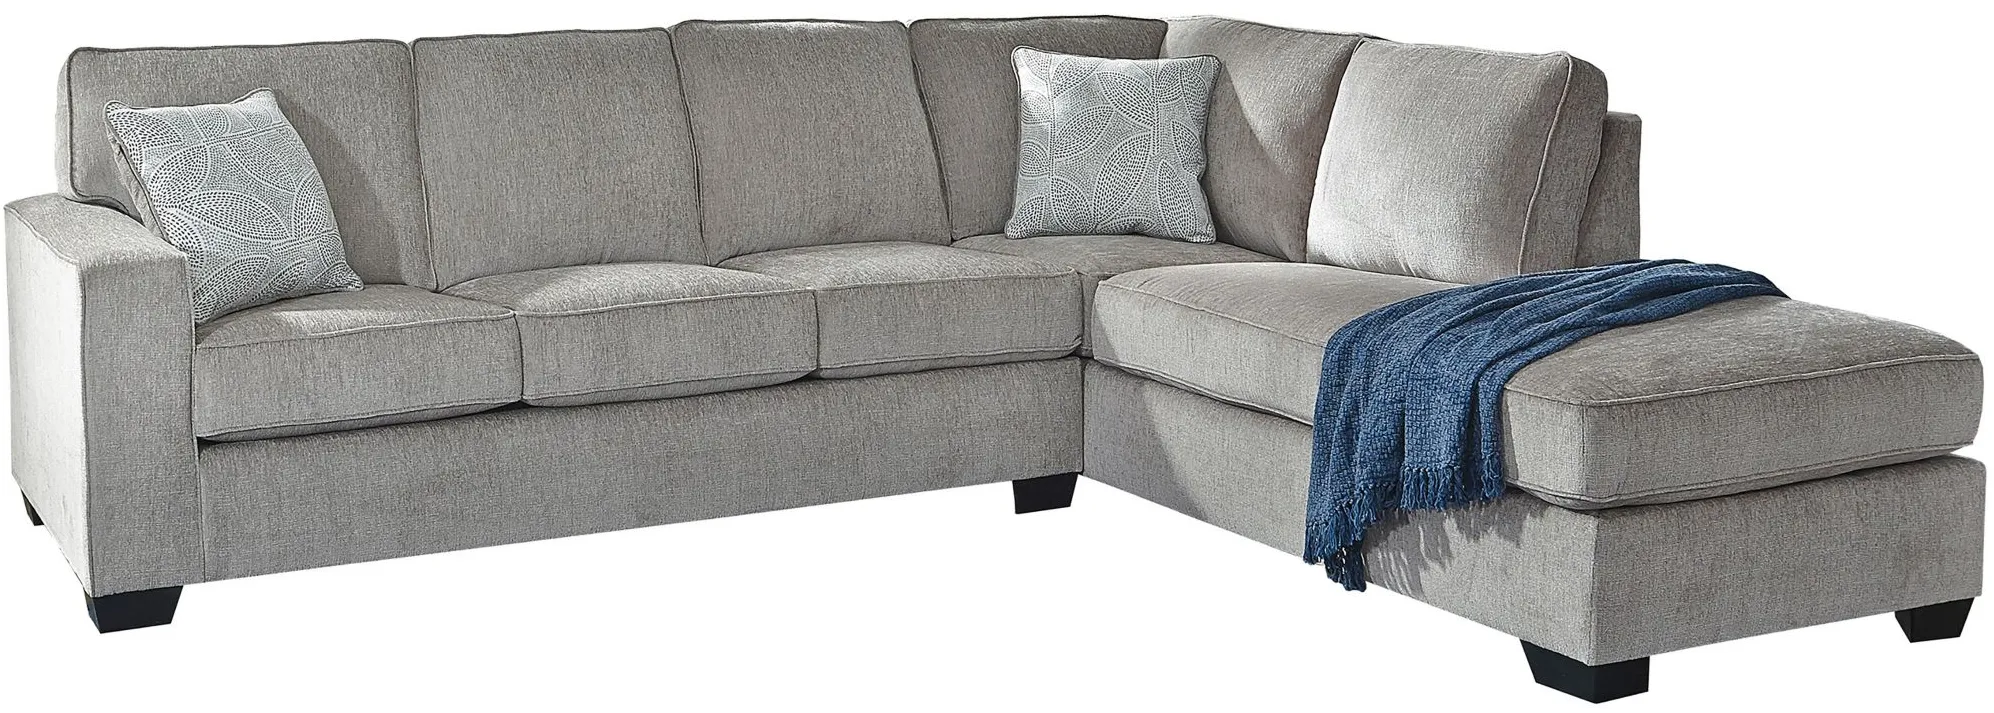 Adelson Chenille 2-pc. Sectional in Alloy by Ashley Furniture